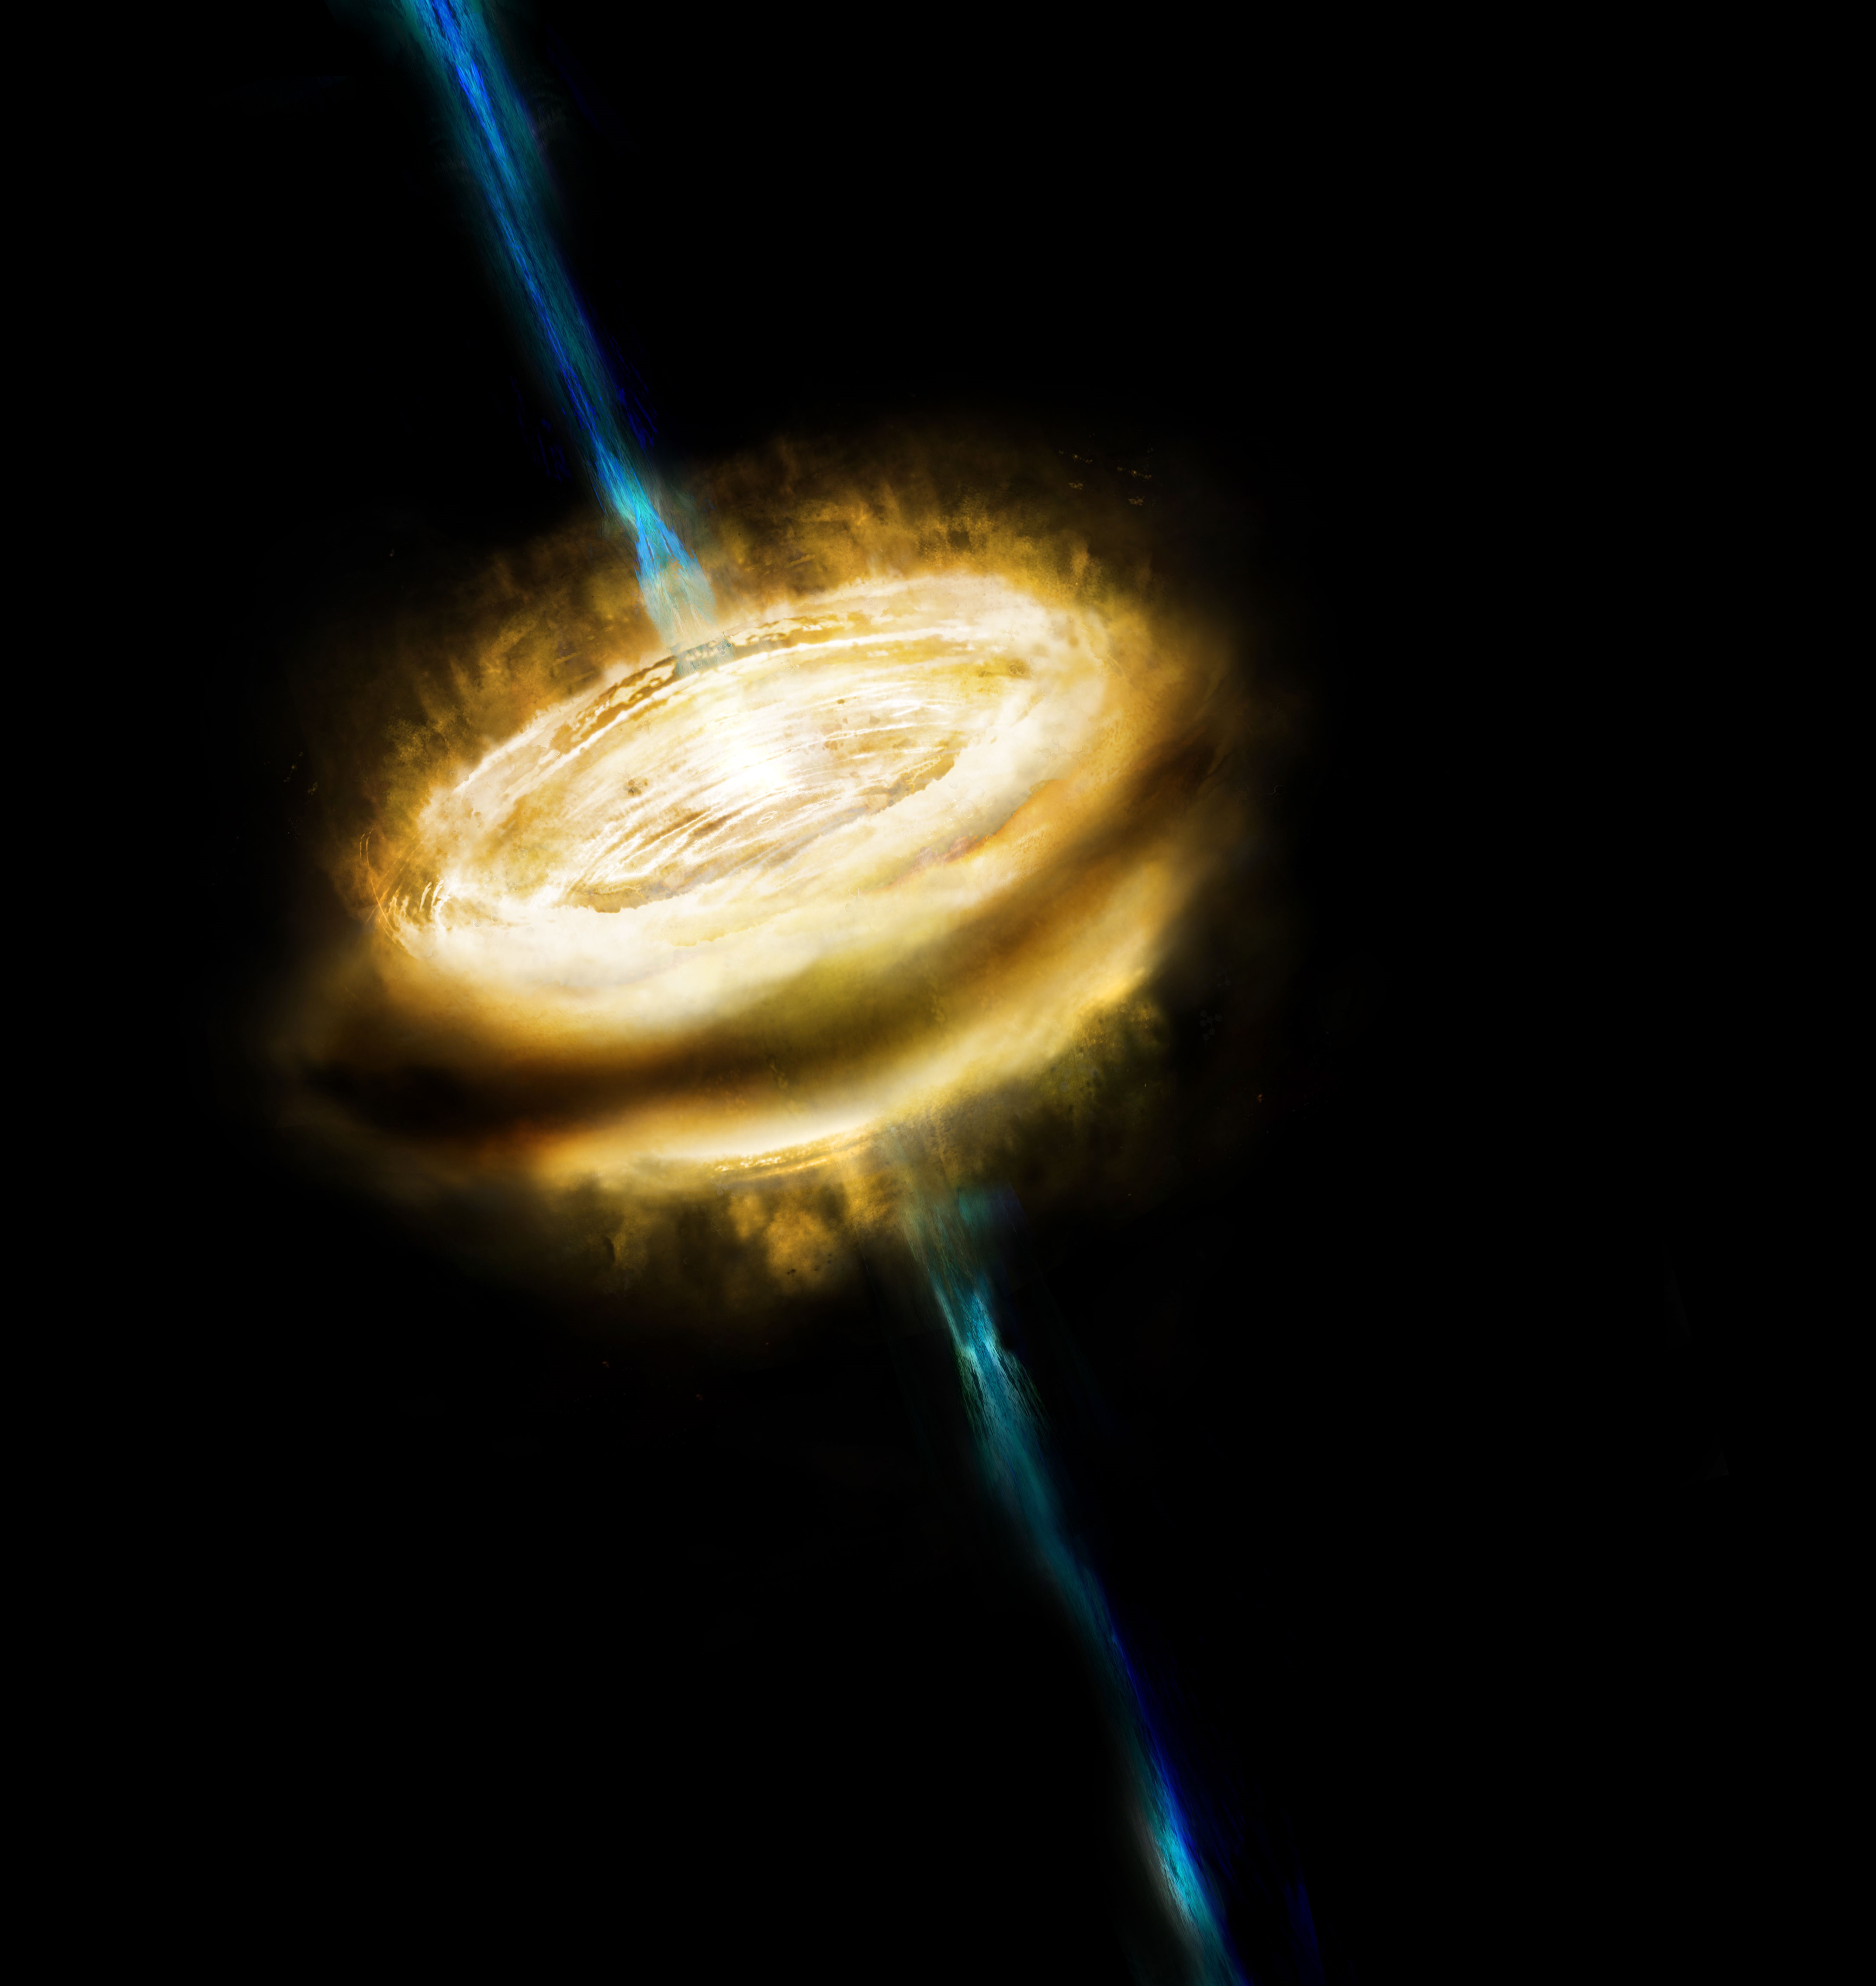 Artistic Conception of Accretion Disk and Spinning Jet around a Baby Star. Credit: ASIAA/Jung-Shan Chang